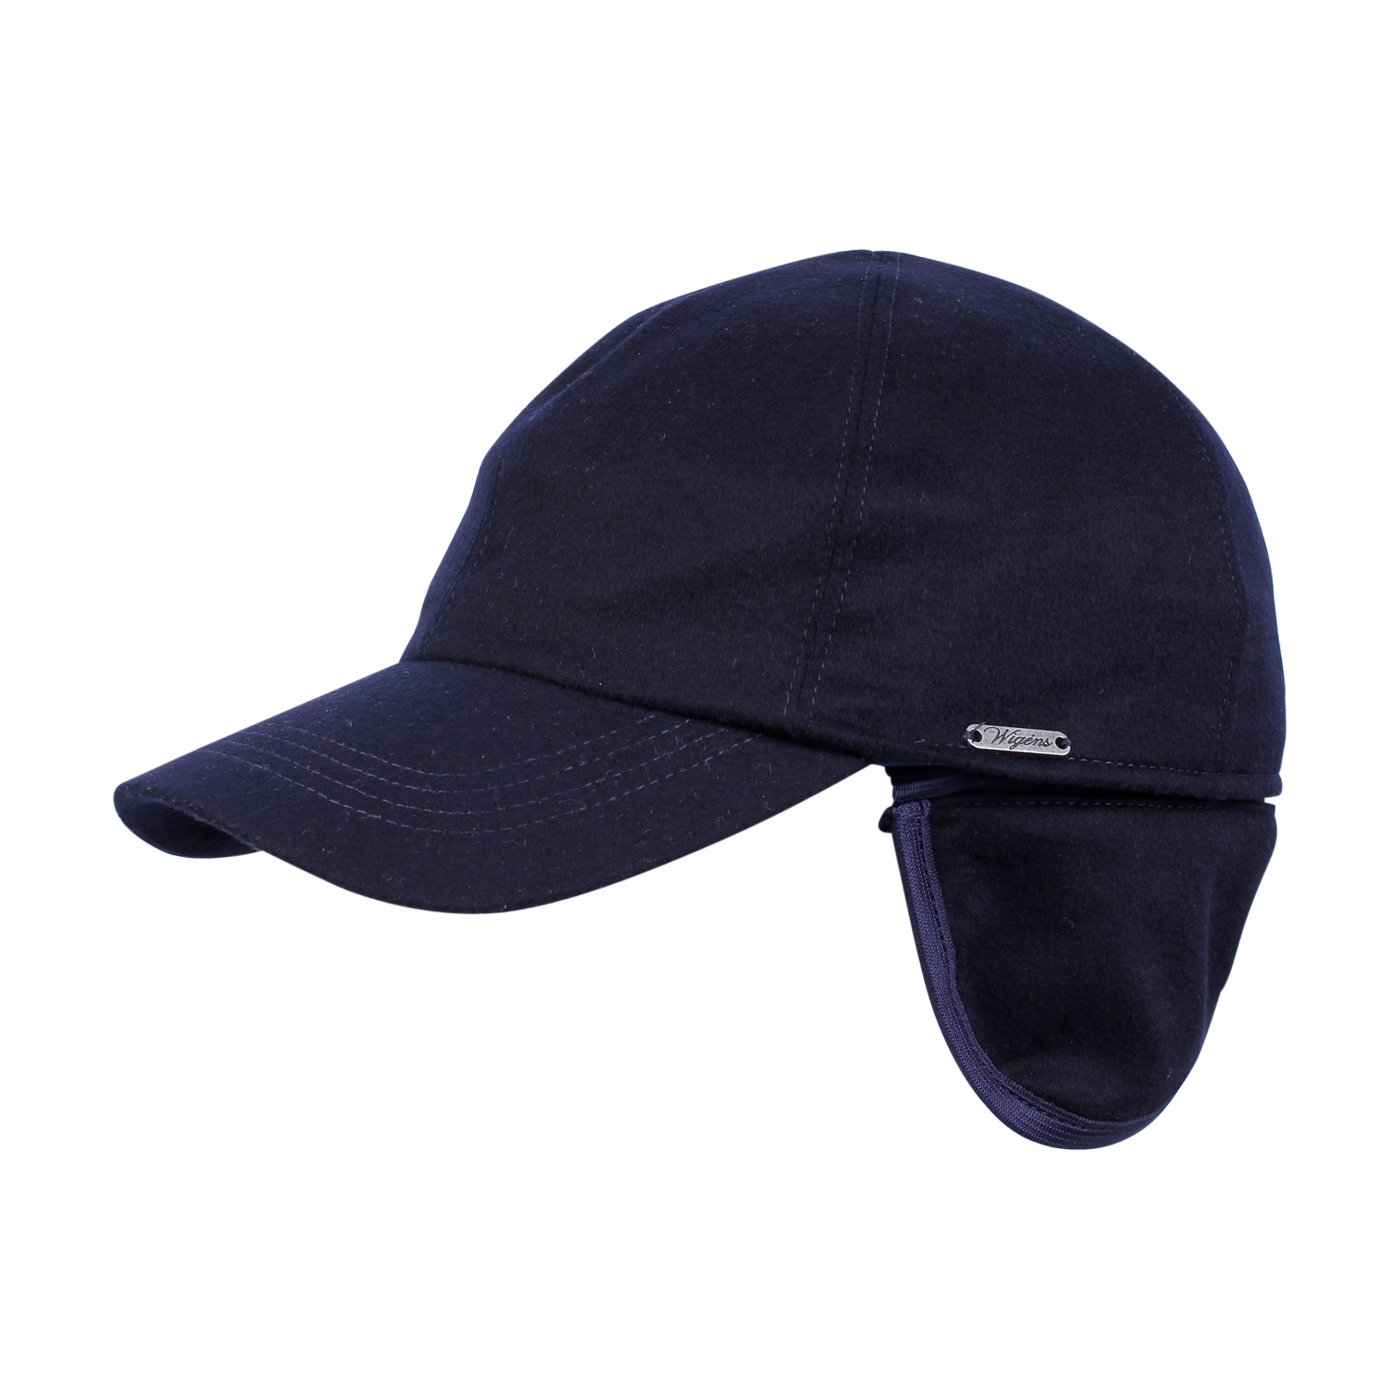 Loro Piana 'Storm System' 100% Cashmere Baseball Classic Cap with Earflaps (Sizes 61 and 62) by Wigens